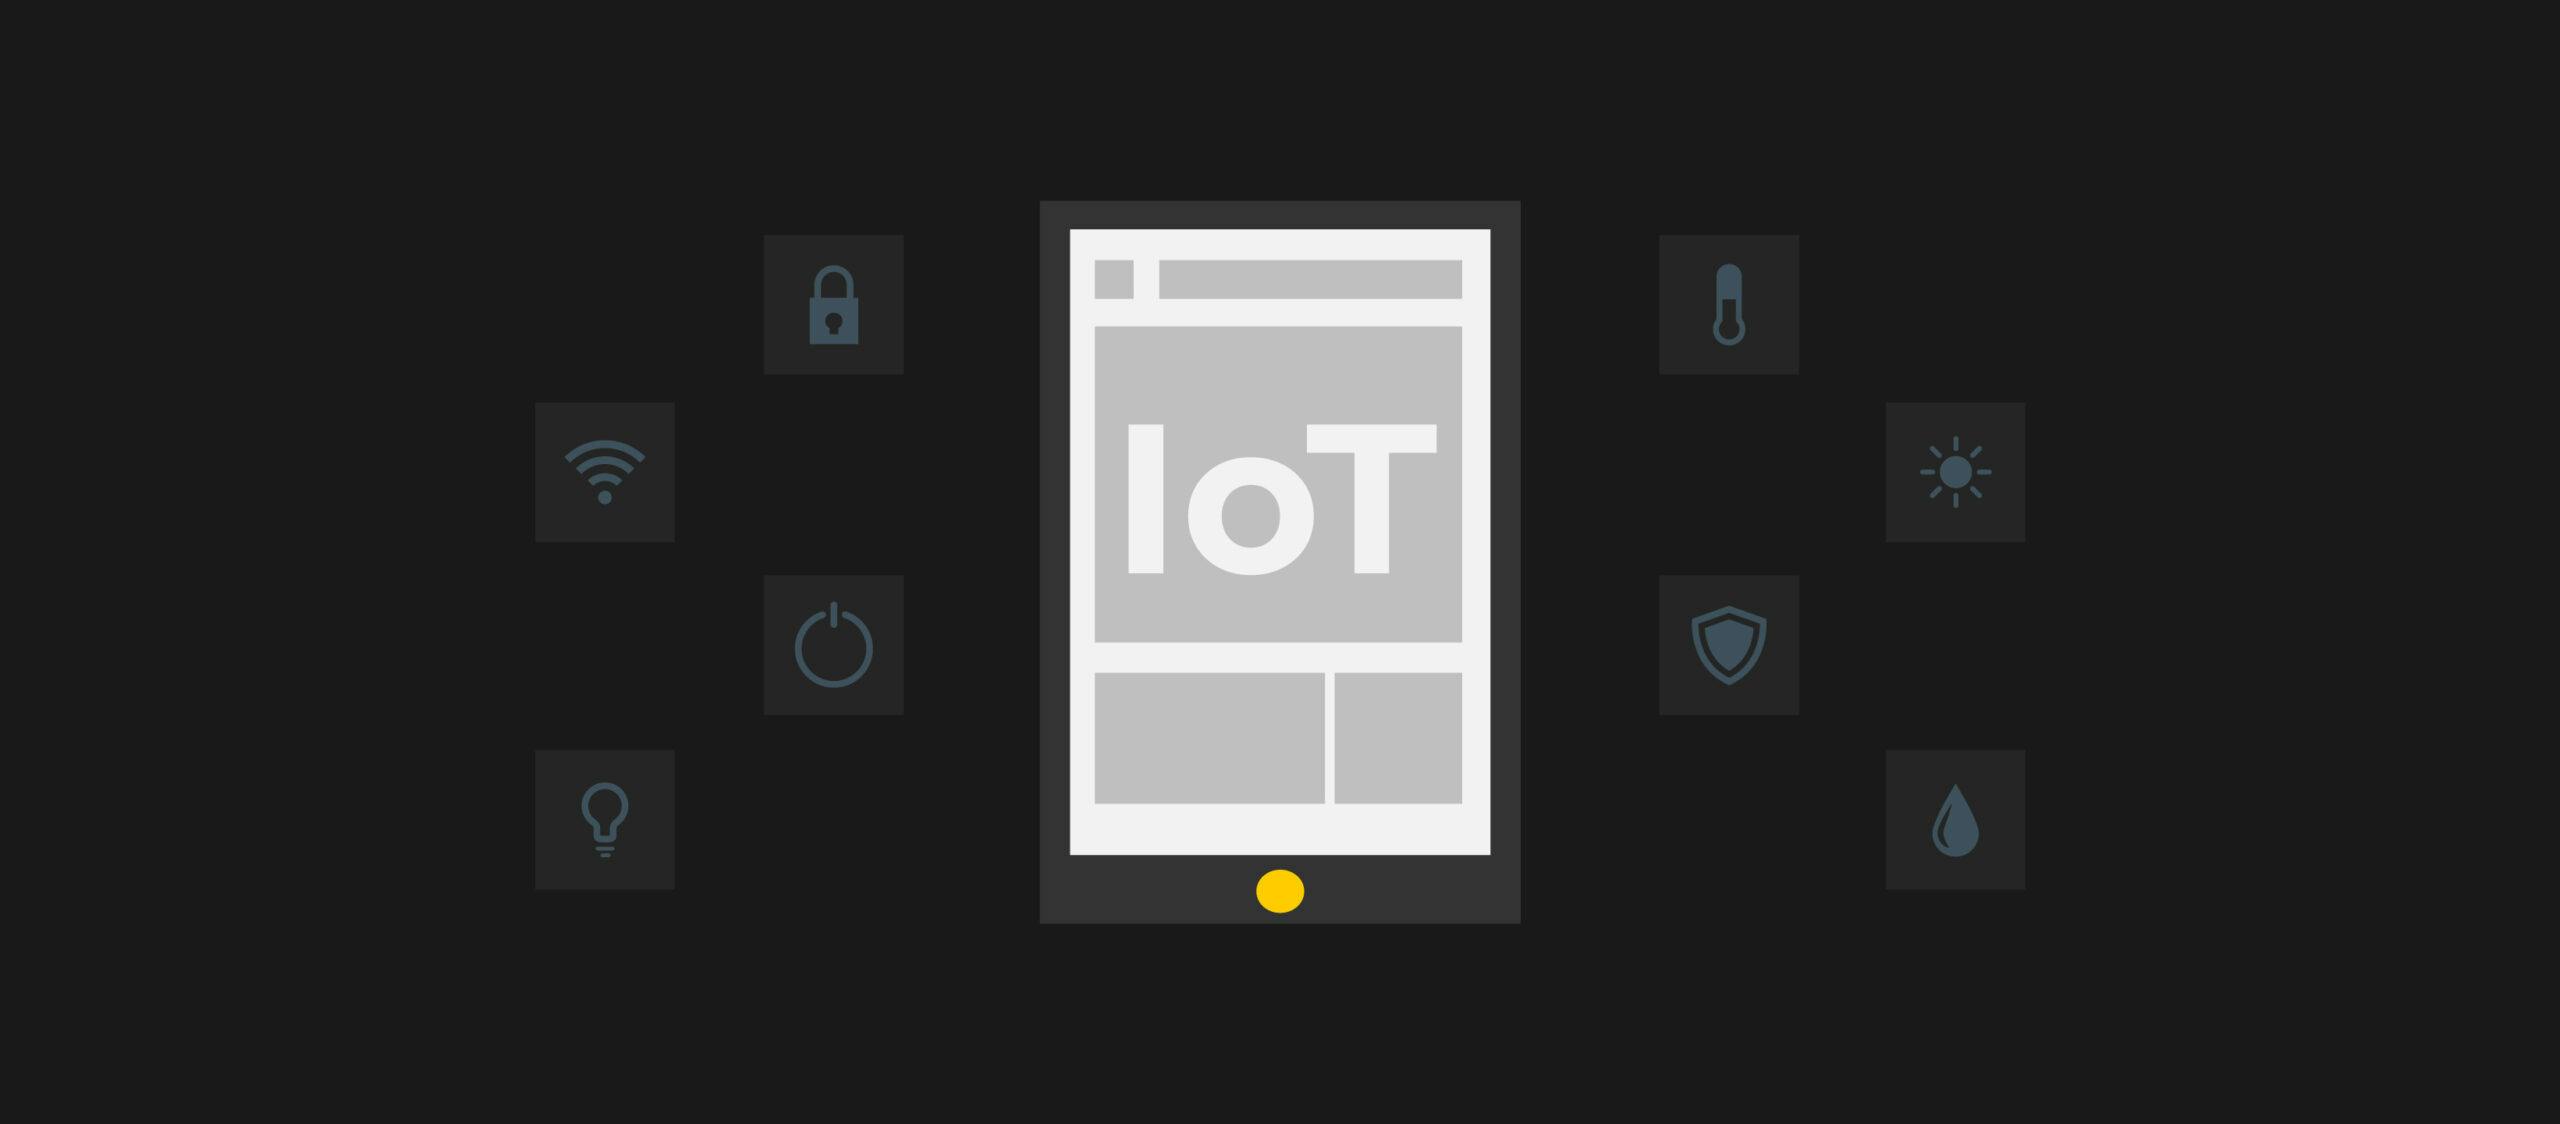 How to Build an IoT App?  